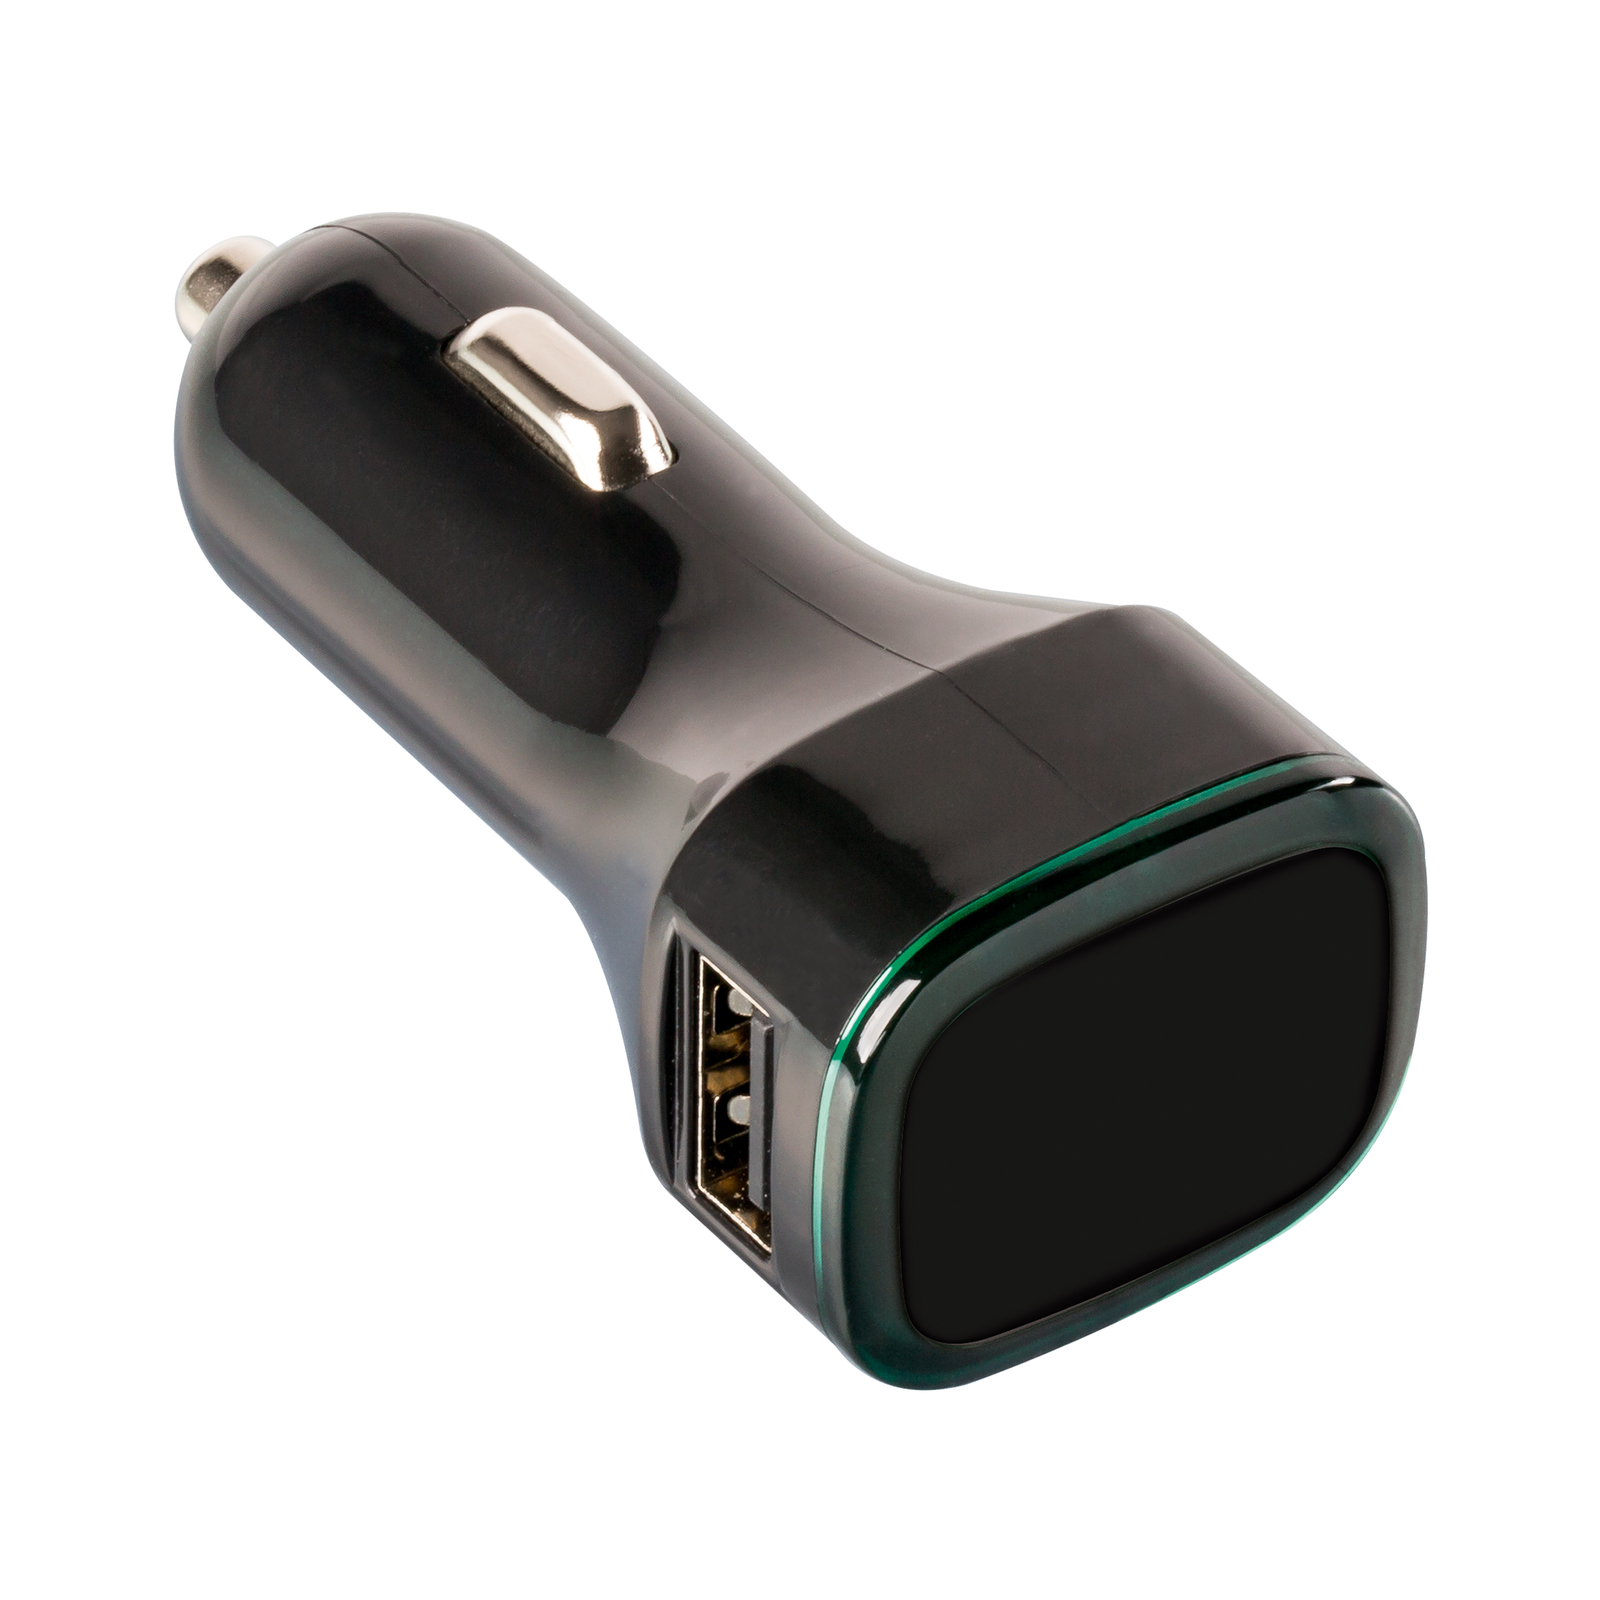 Corporate USB car charger adapter RC 500